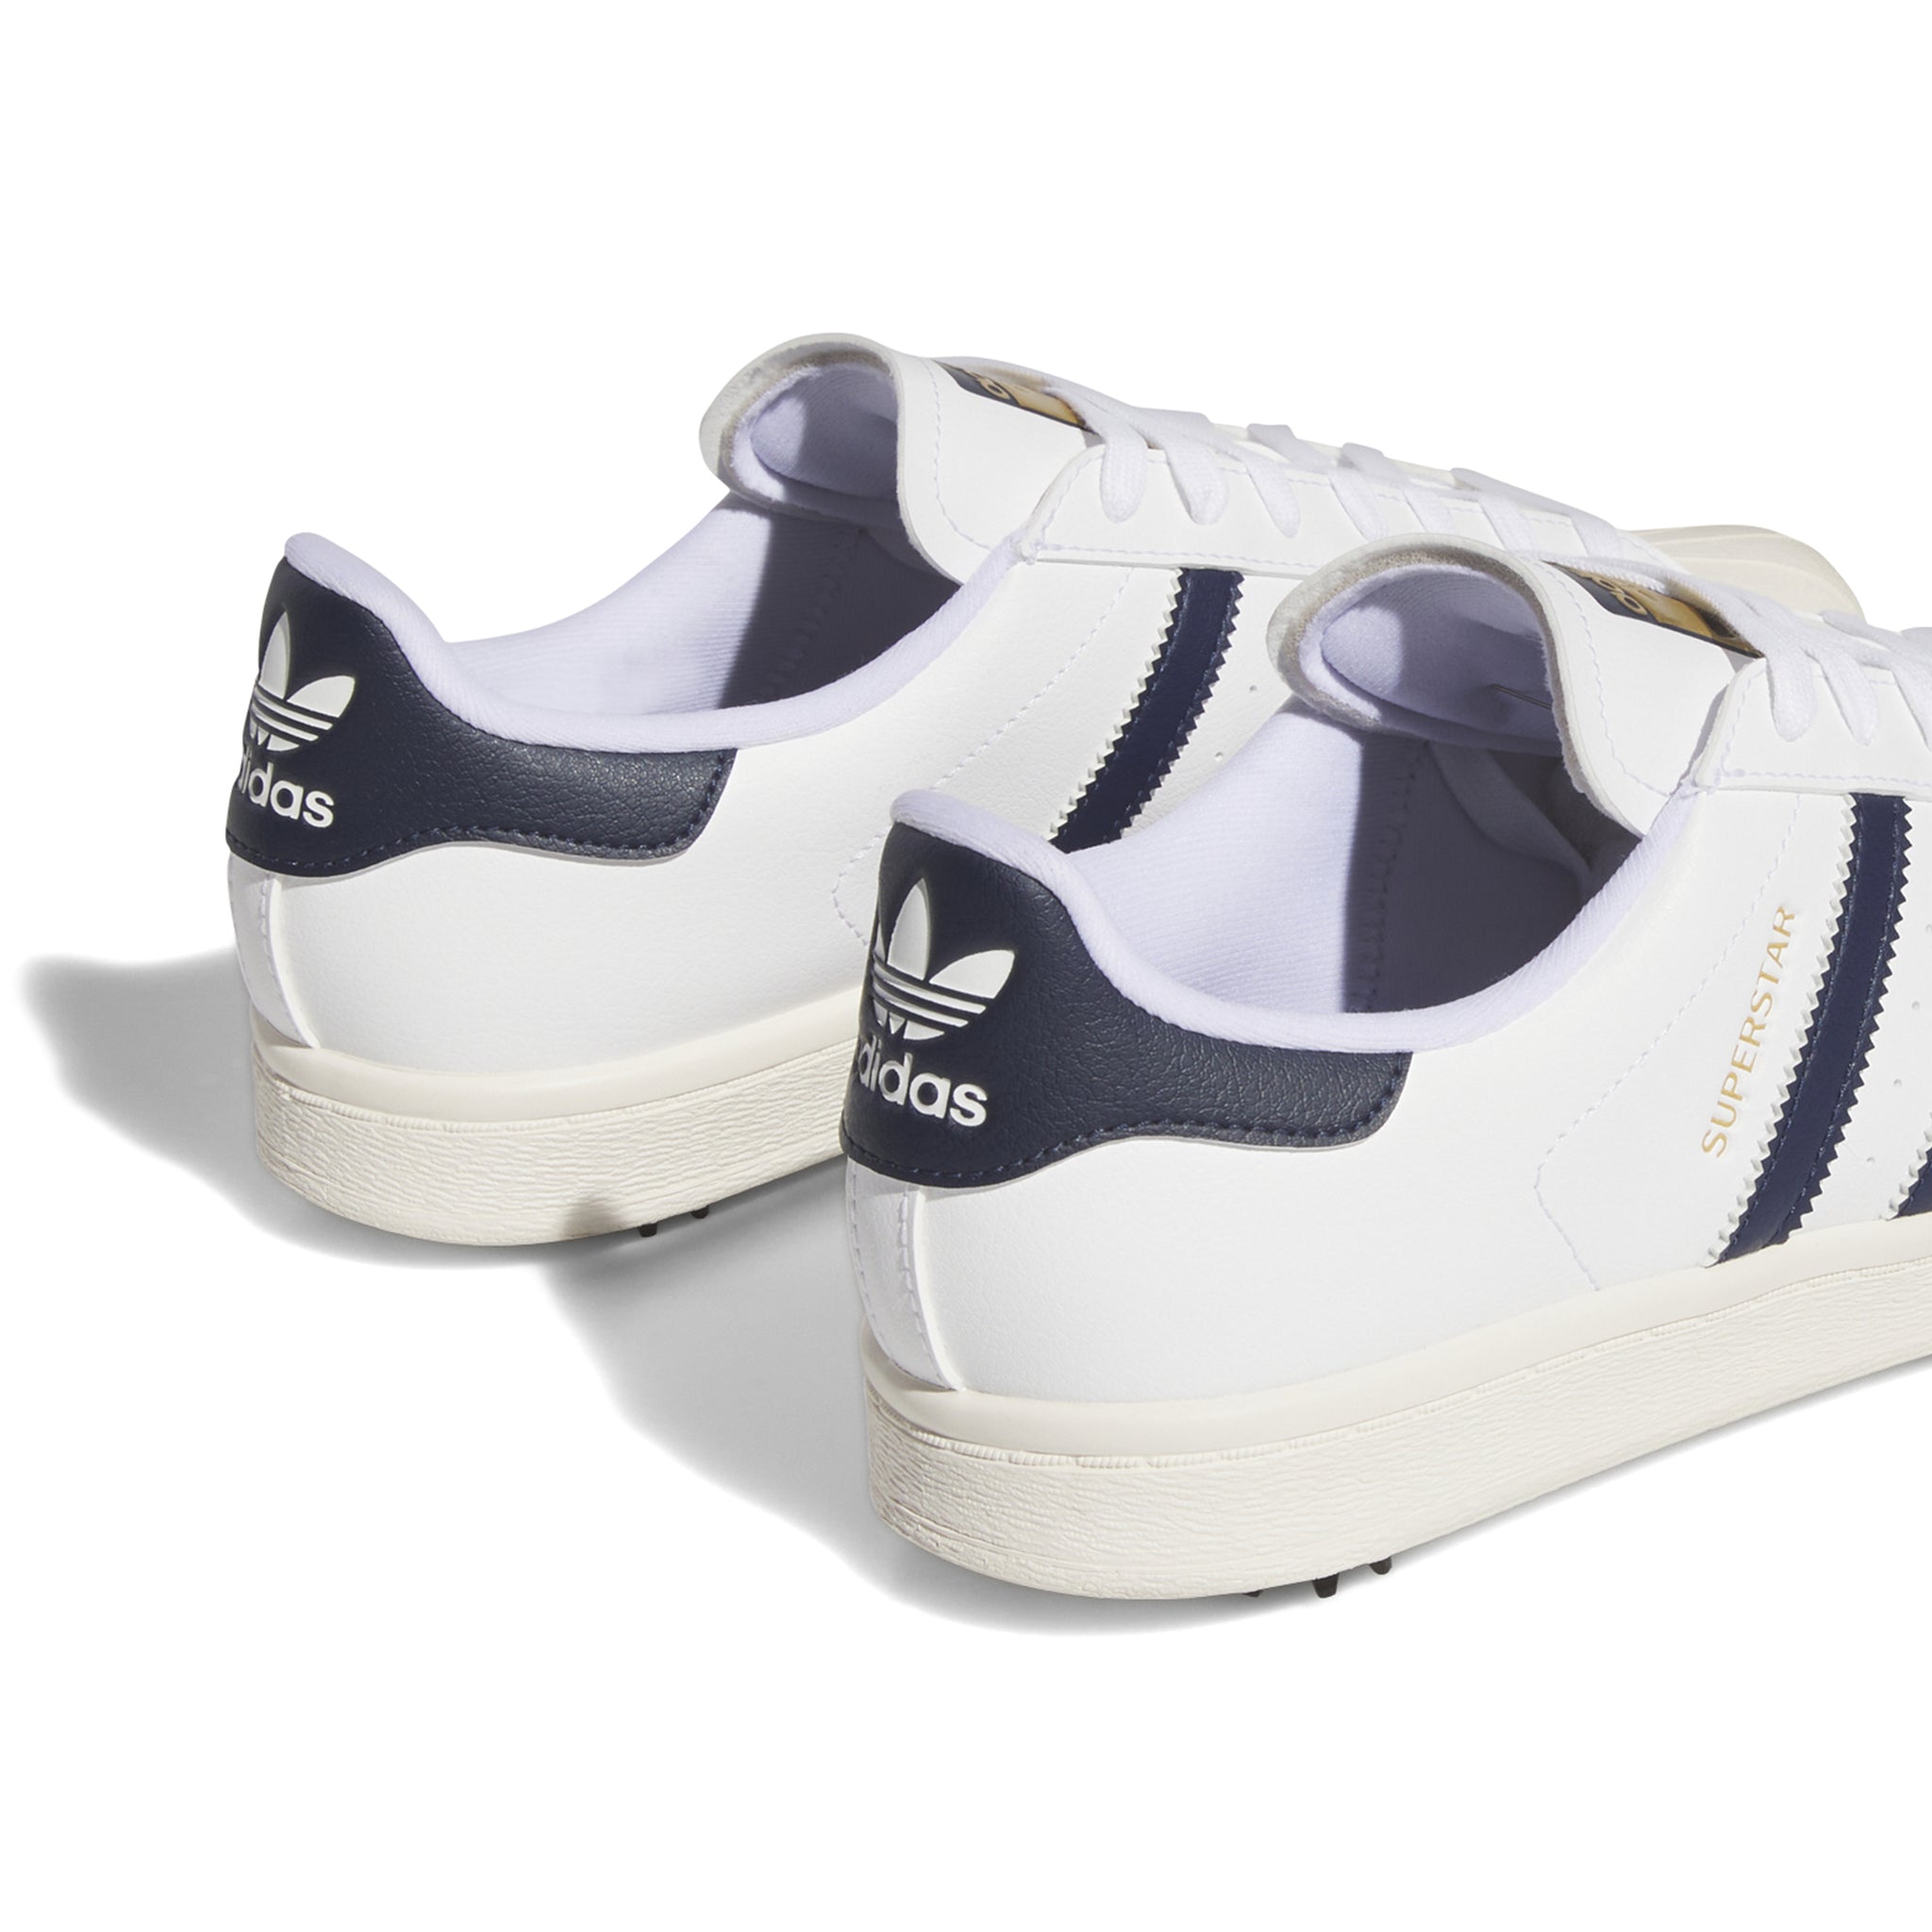 adidas-superstar-golf-shoes-id5003-white-collegiate-navy-off-white